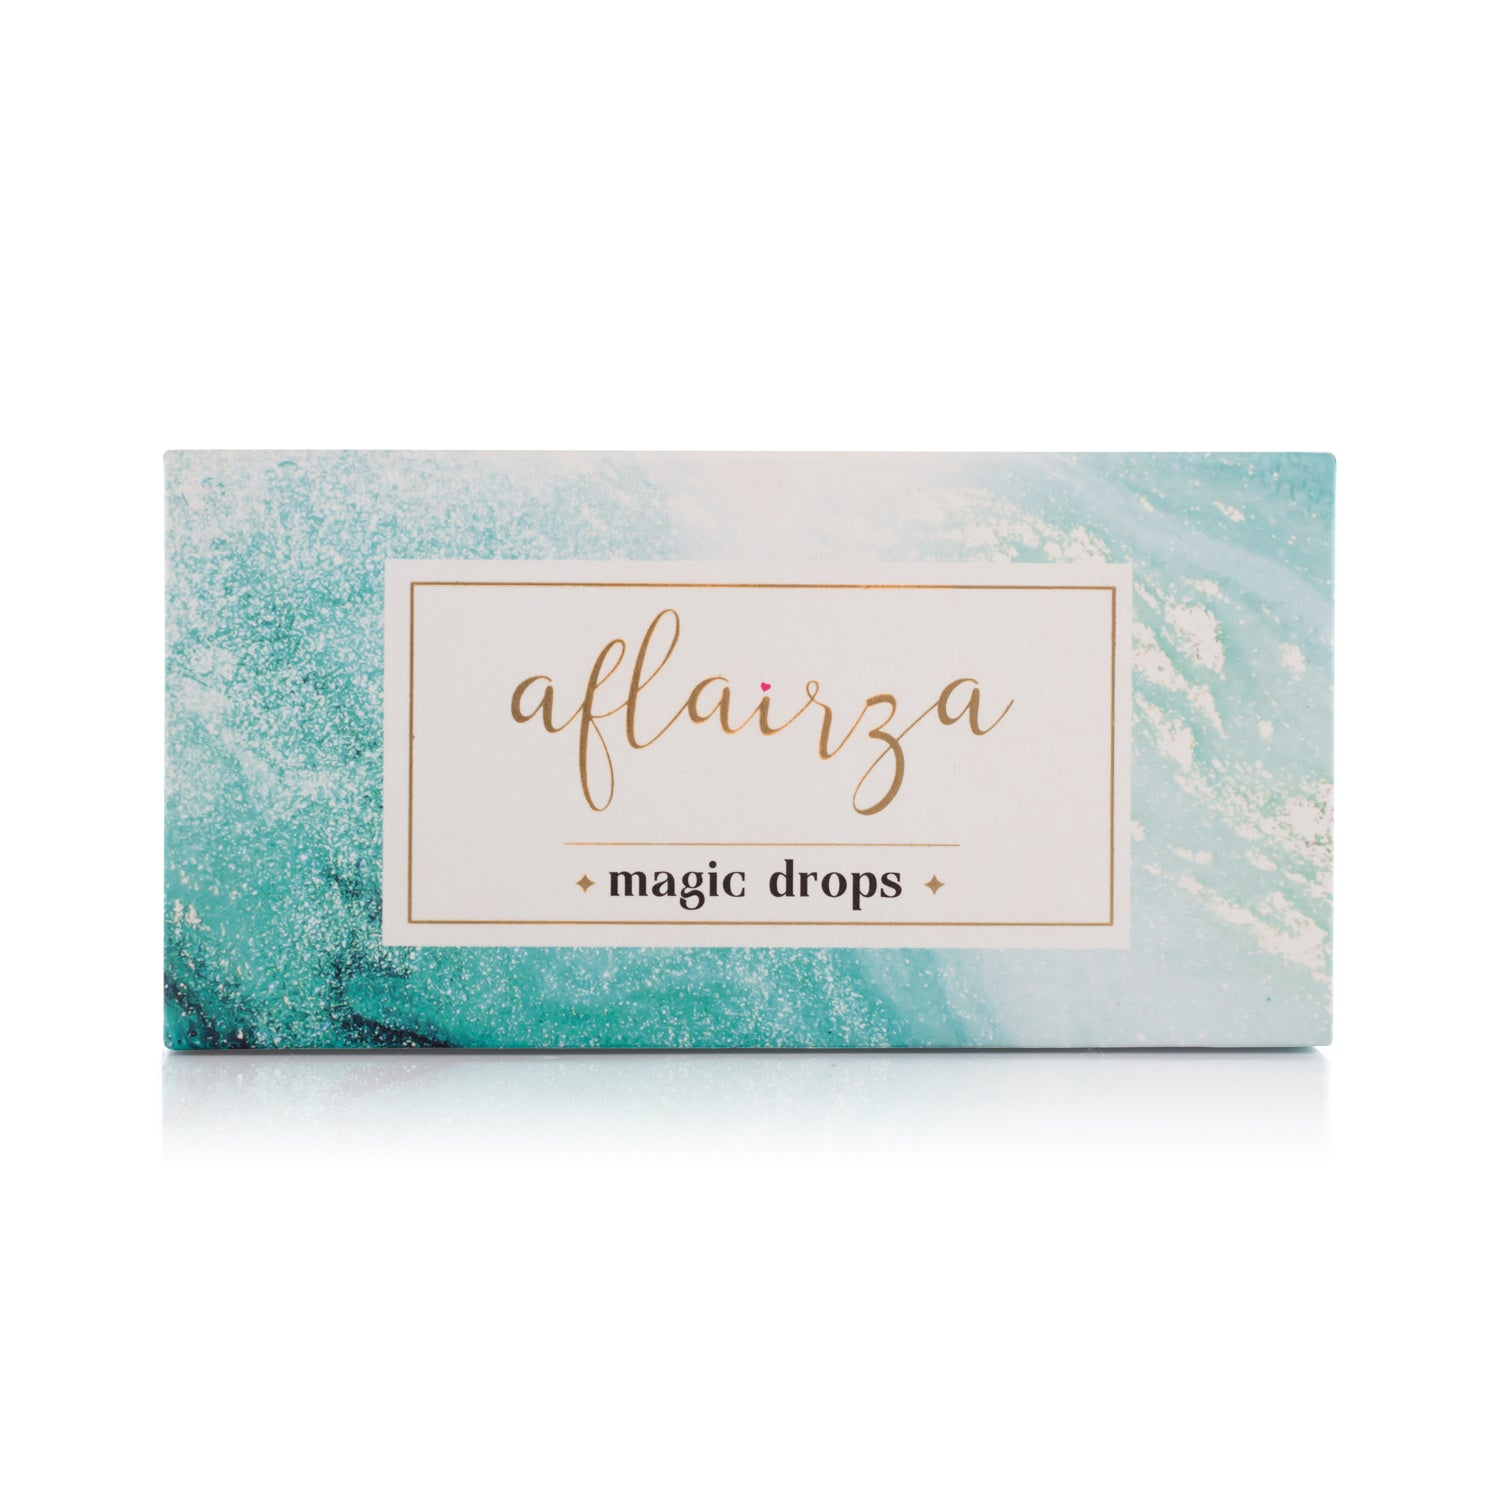 Magic Drops for Waterproof* and Sweat-resistant Makeup - Enhance Longevity and Radiance